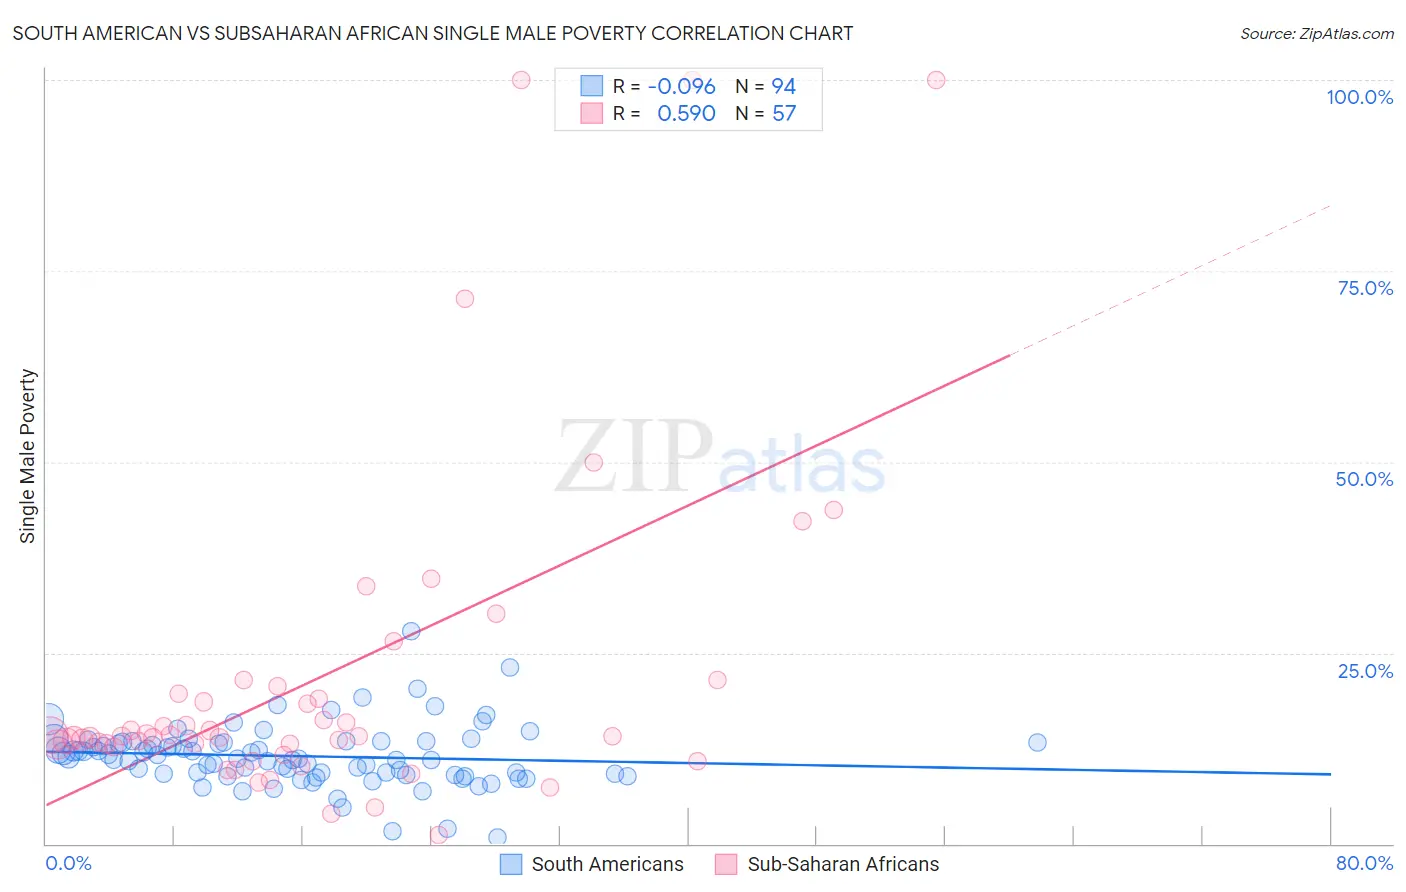 South American vs Subsaharan African Single Male Poverty